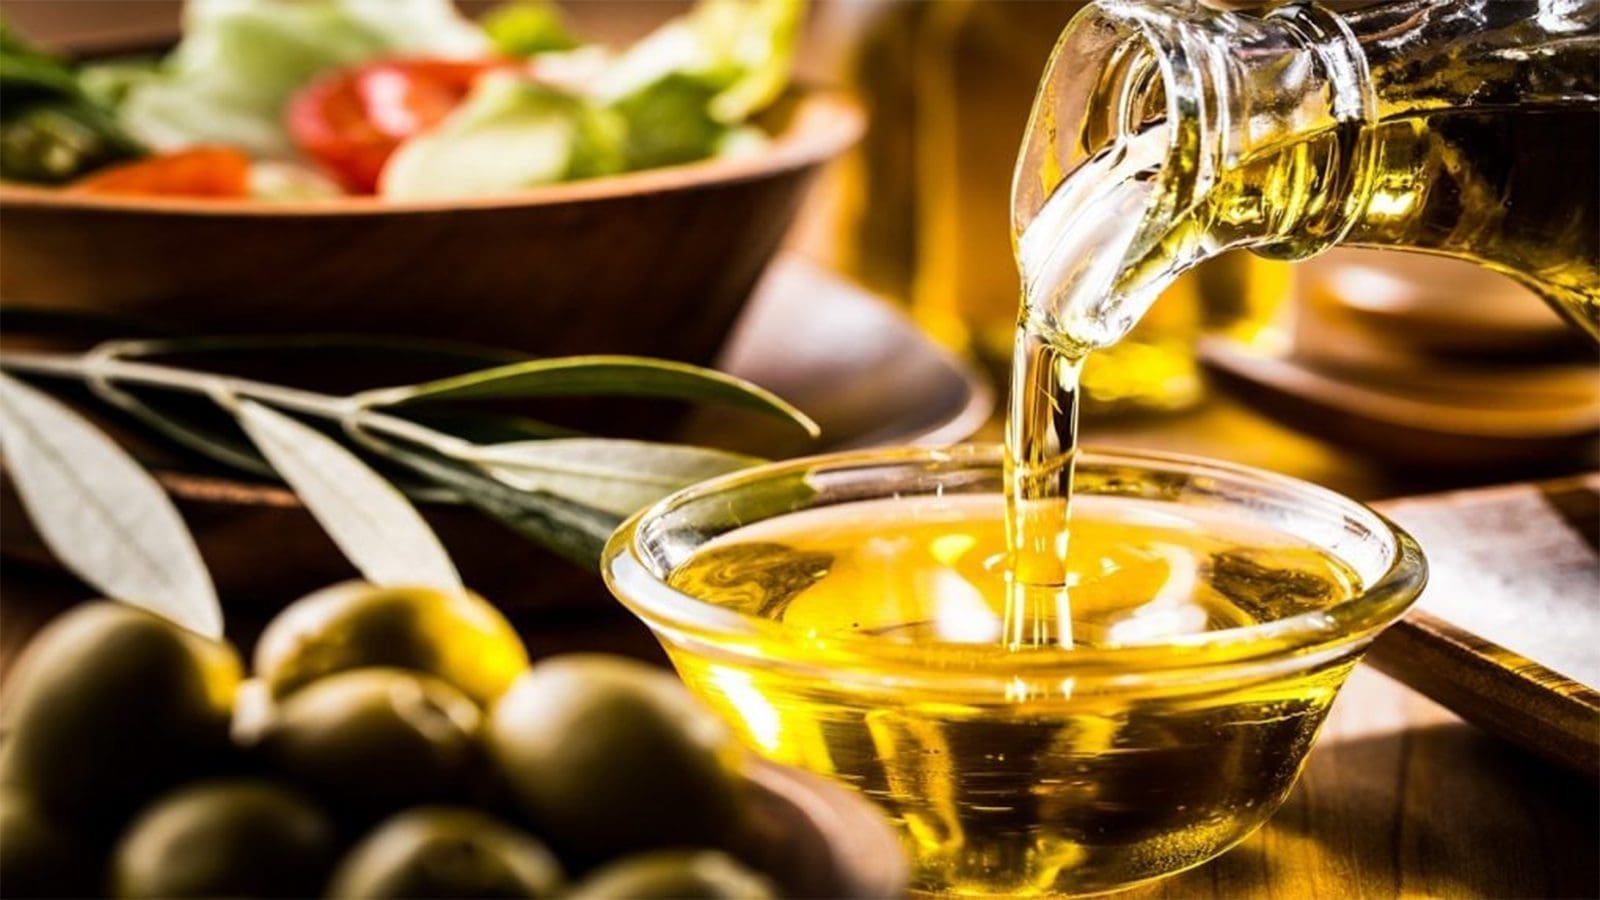 FSSAI culminates nation-wide campaign against adulteration in edible oils